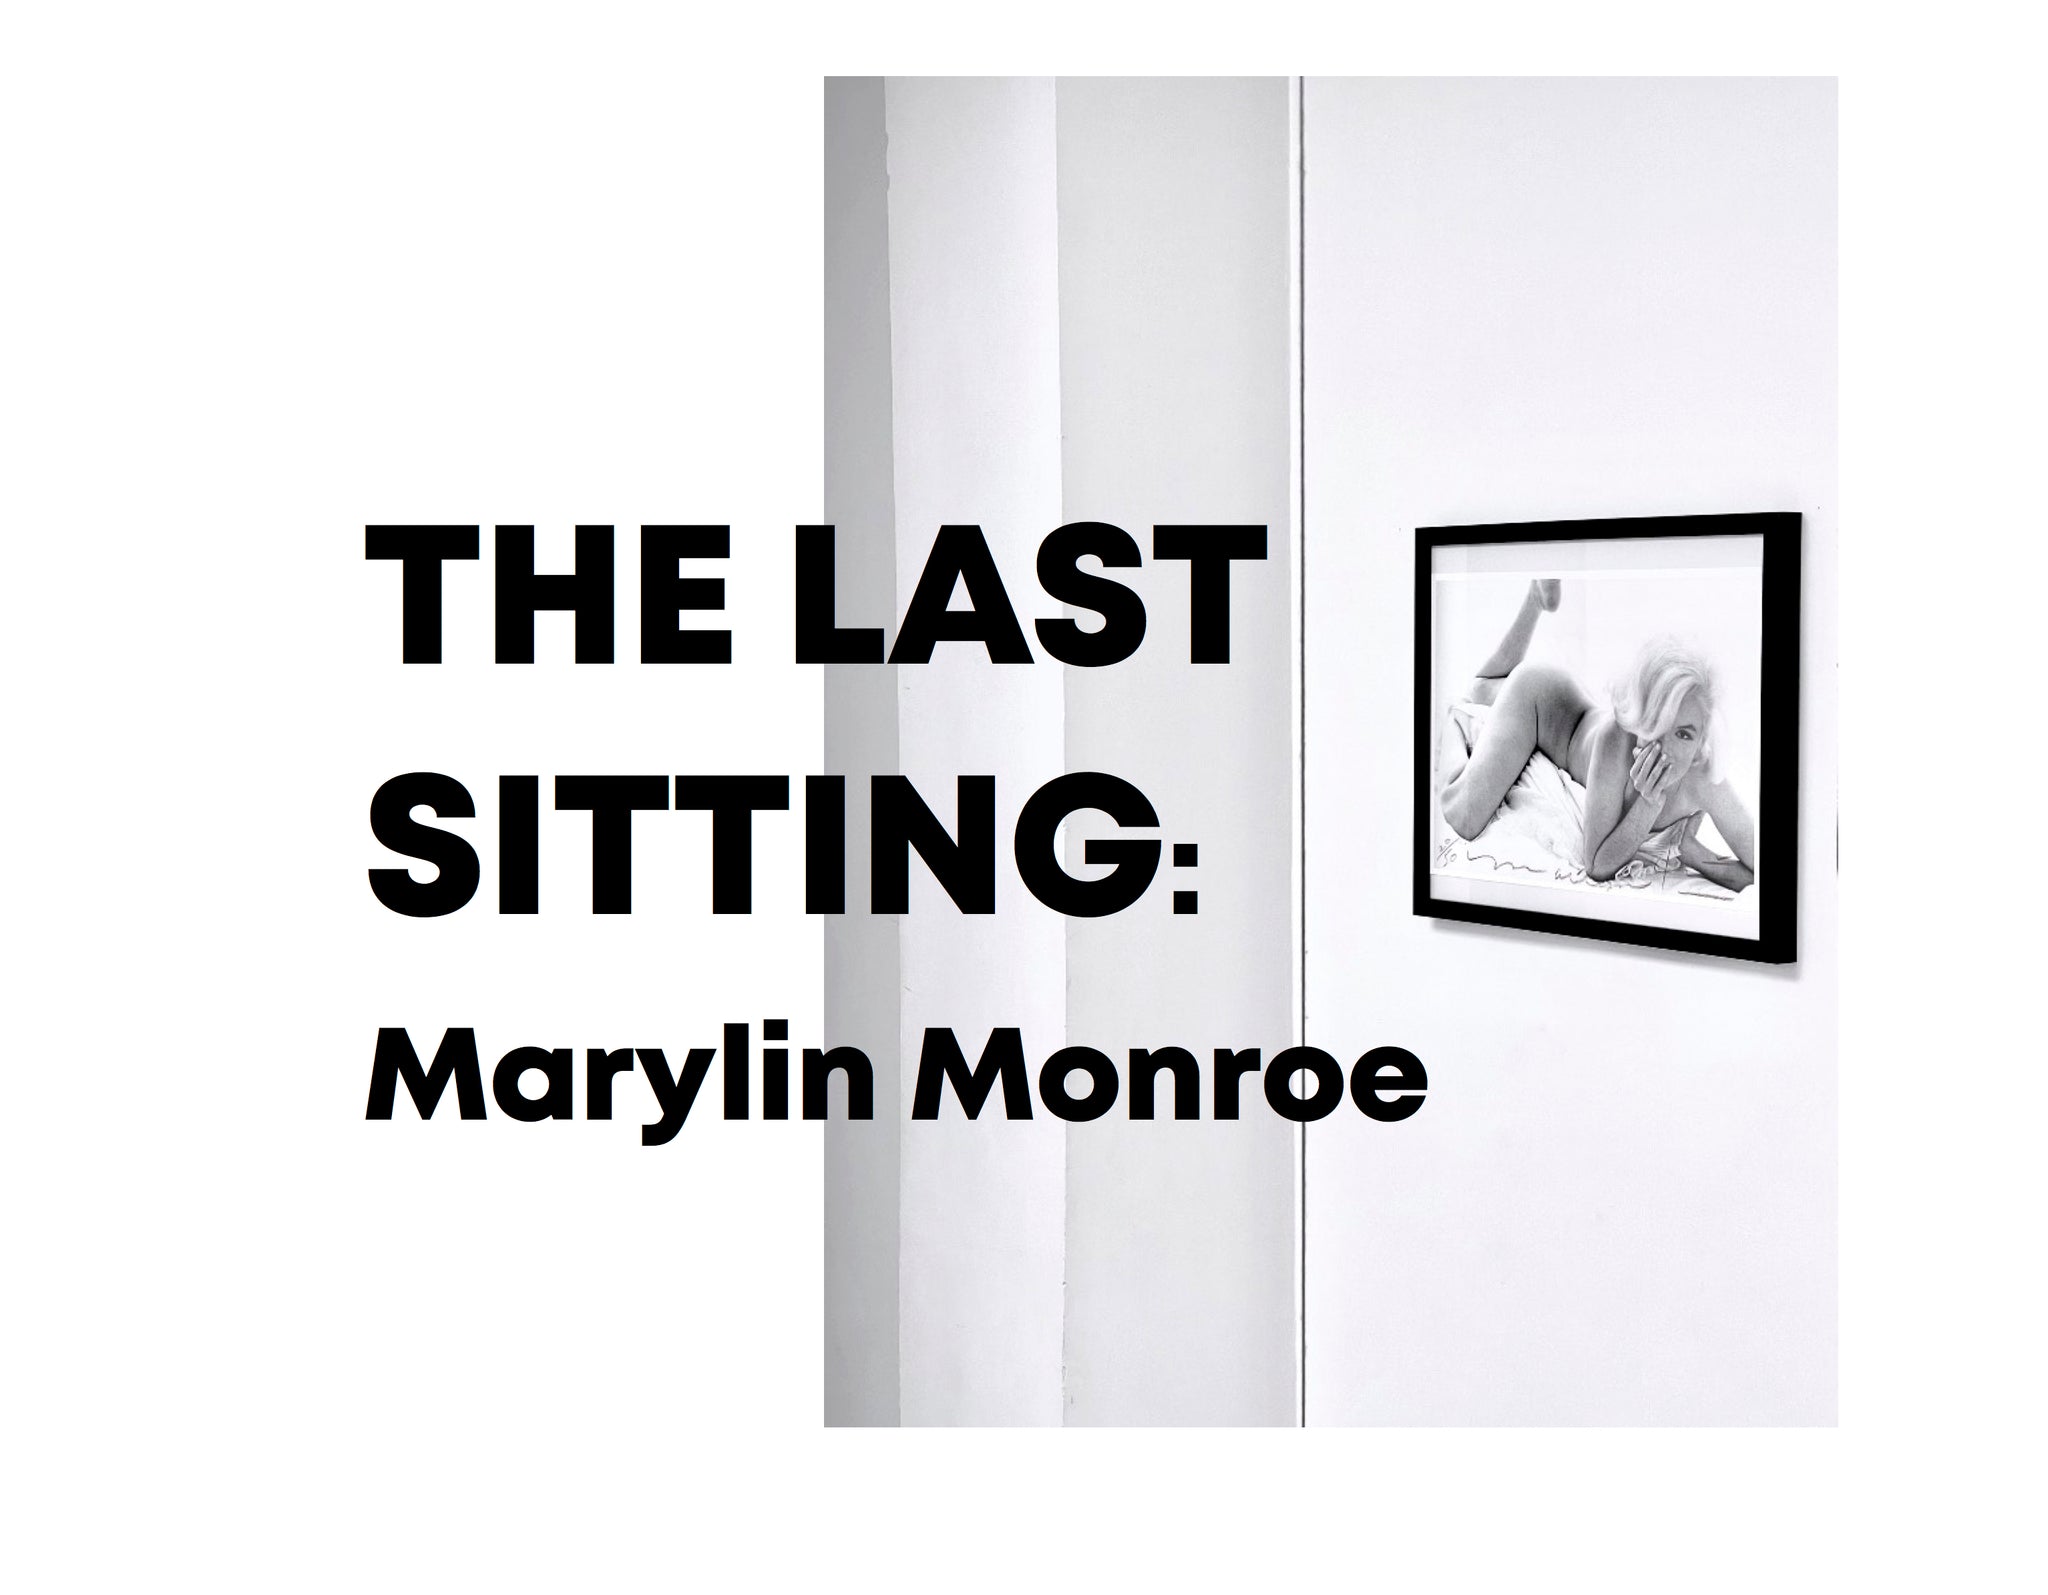 IN-STORE EXHIBITON: THE LAST SITTING